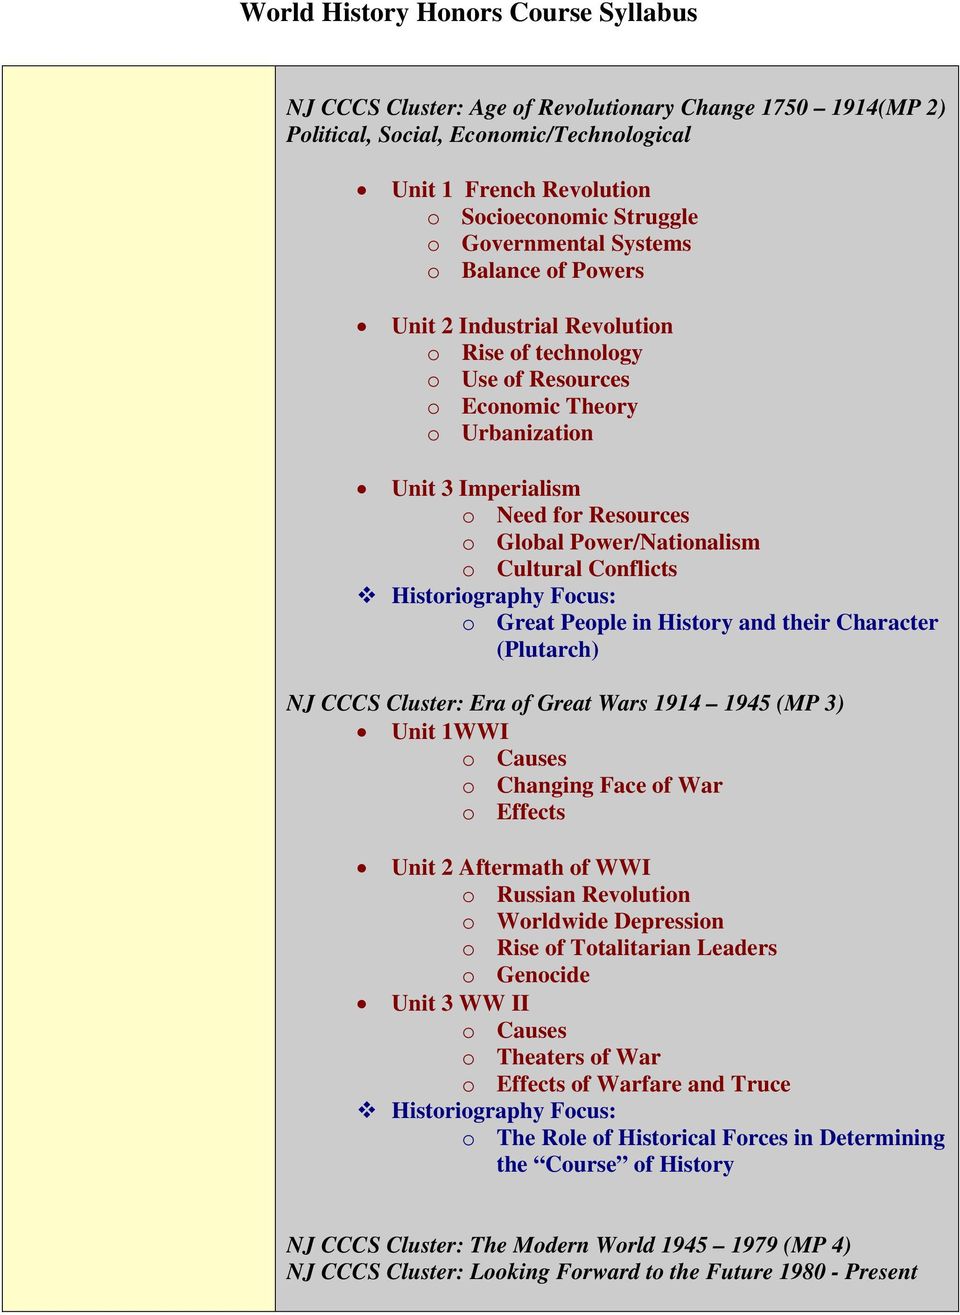 Historiography Focus: o Great People in History and their Character (Plutarch) NJ CCCS Cluster: Era of Great Wars 1914 1945 (MP 3) Unit 1WWI o Causes o Changing Face of War o Effects Unit 2 Aftermath